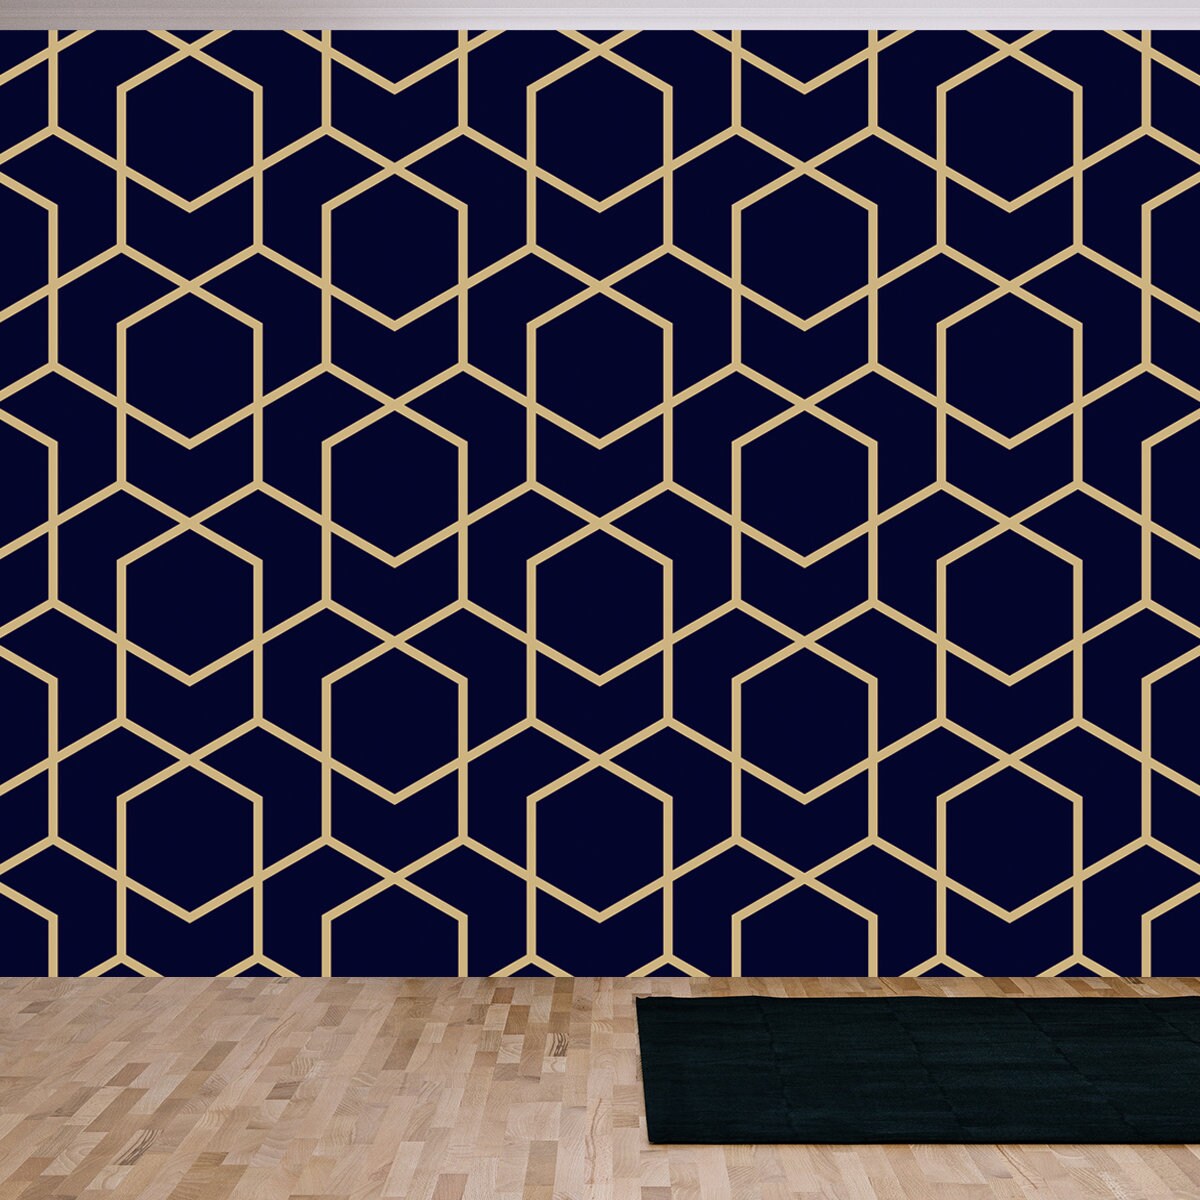 Abstract Geometric Pattern with Lines, Rhombuses. Blue-Black and Gold Texture Wallpaper Living Room Mural